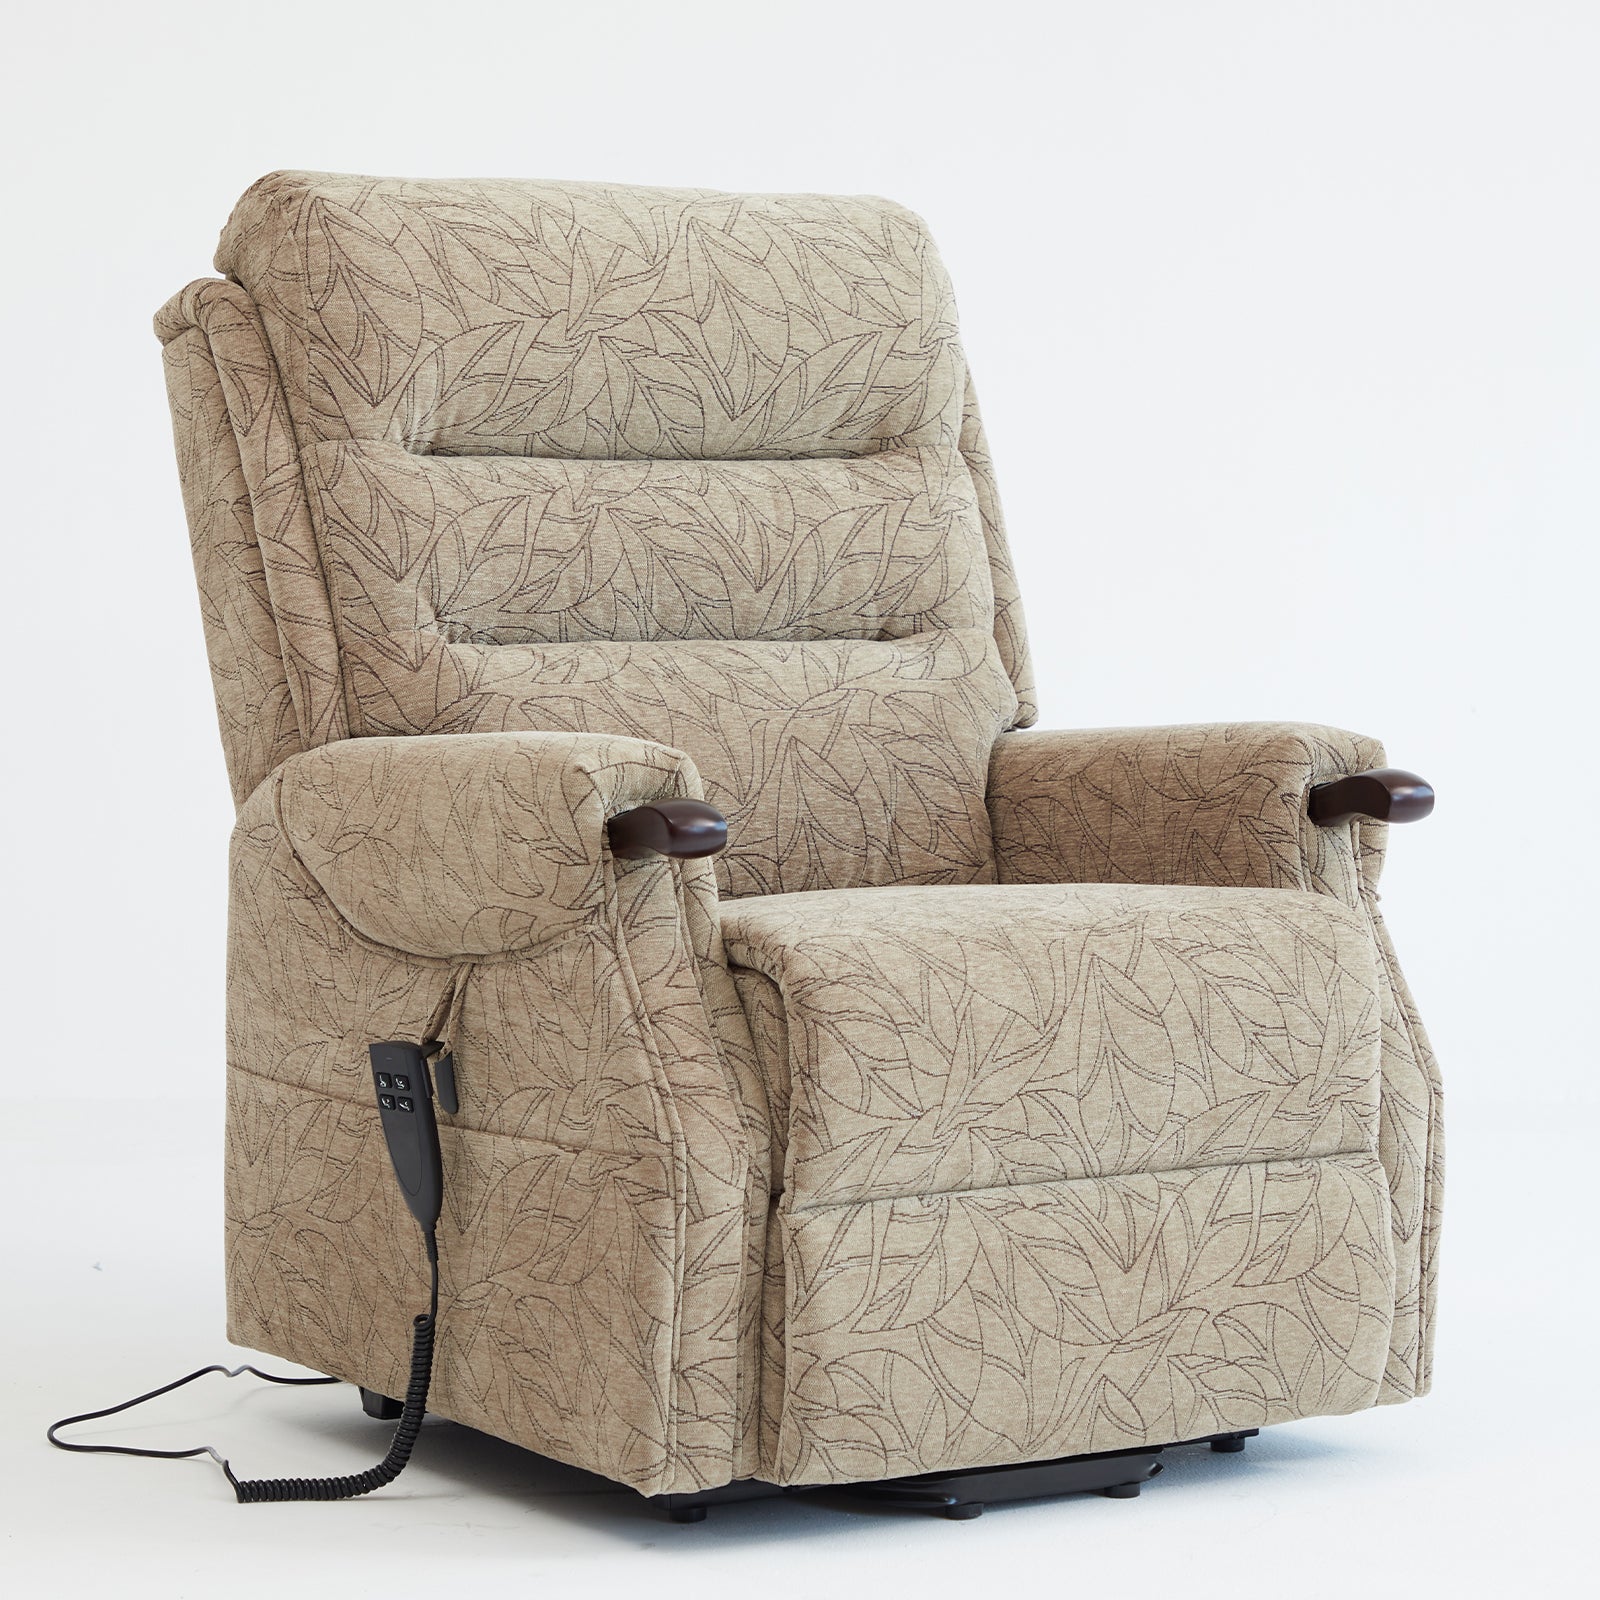 9193 Wide Lift Chair Recliner With Infinite positions(Lay Flat Recliner)